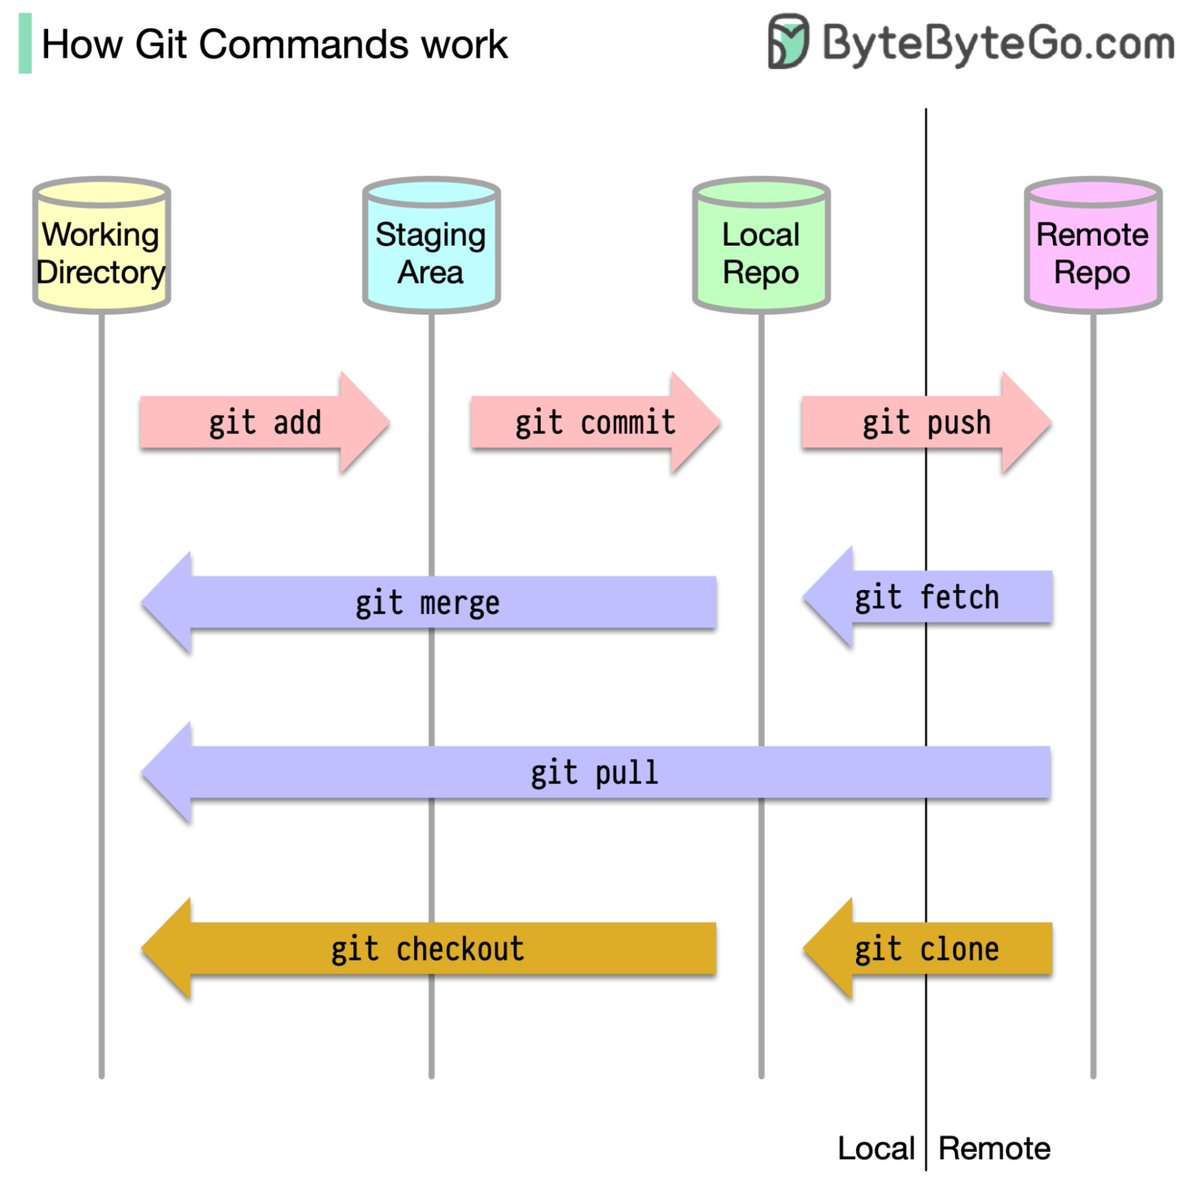 Git can seem confusing at first, but a few key concepts make it clearer:

There are 4 locations for your code:
- Working Directory
- Staging Area
- Local Repository
- Remote Repository (like GitHub)

Basic commands move code between these locations:
- git add stages changes
- git